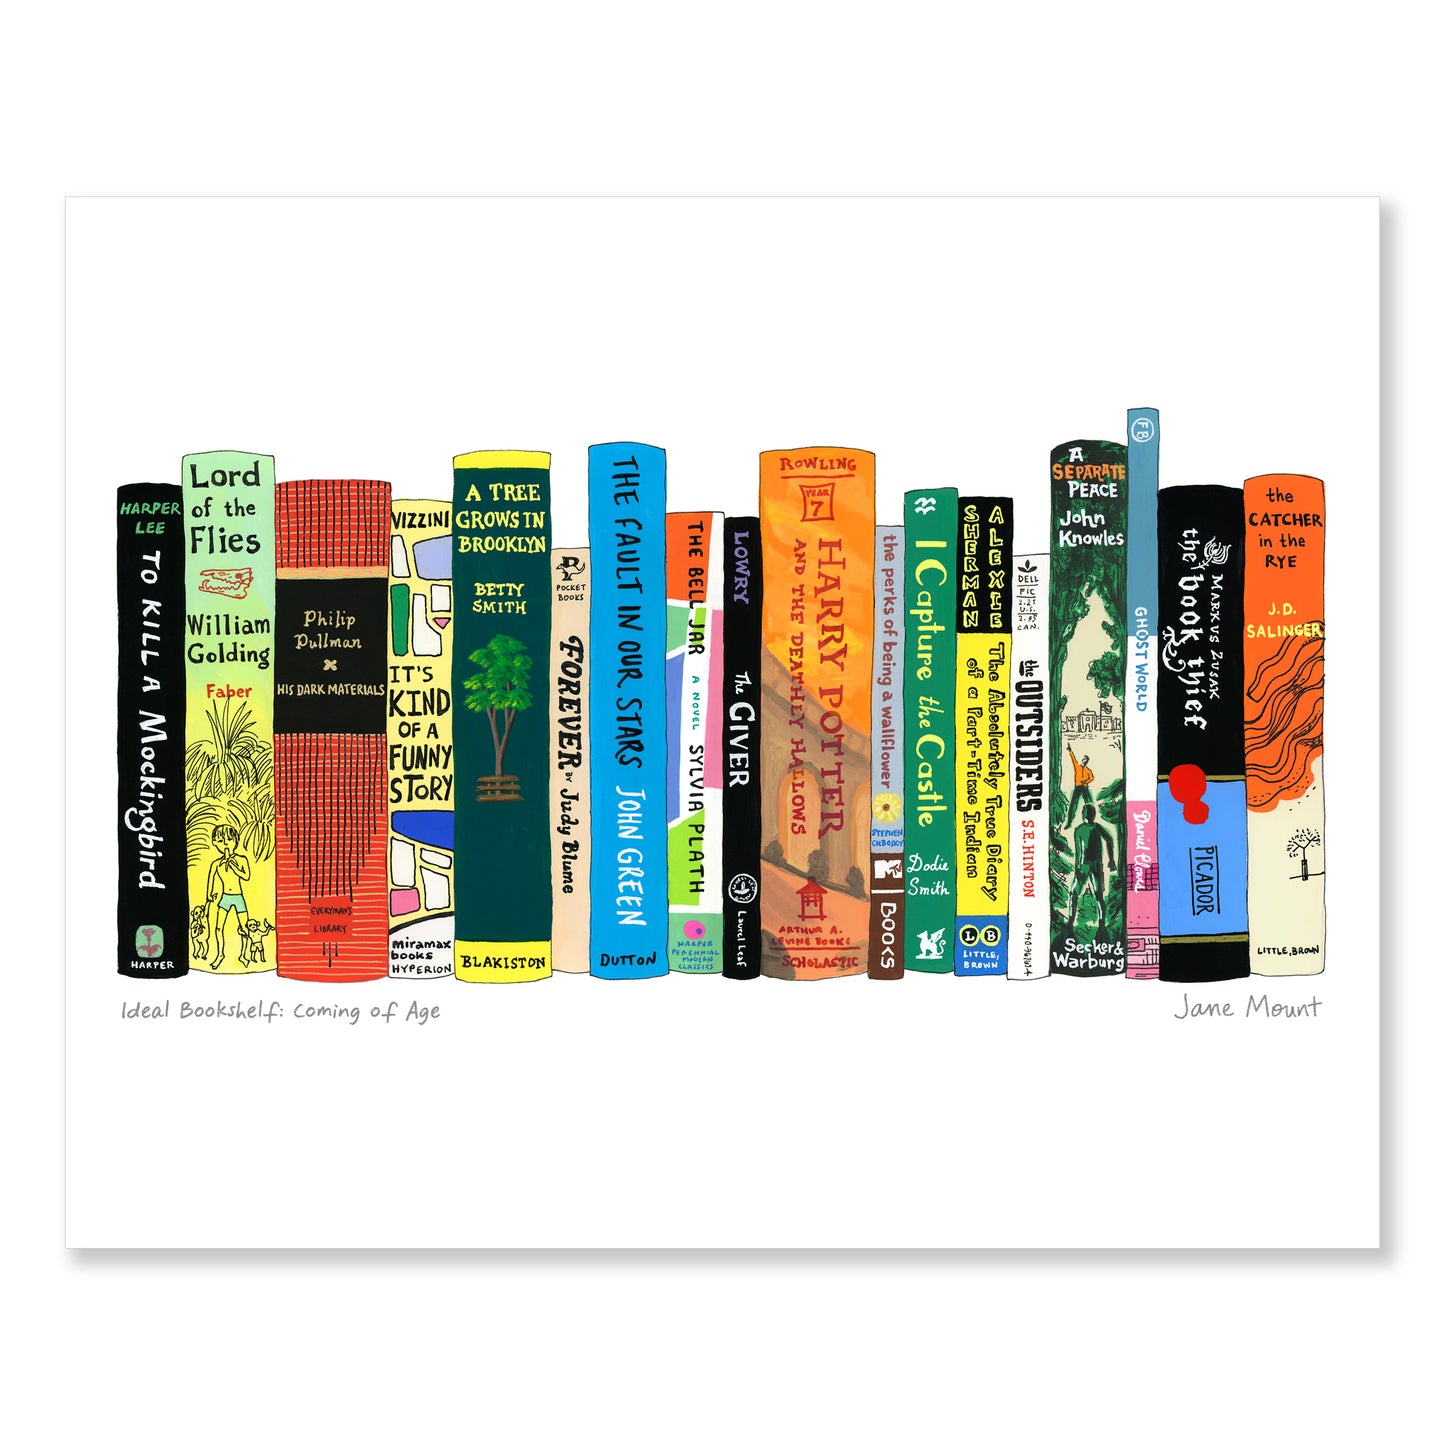 Ideal Bookshelf 651: Coming of Age